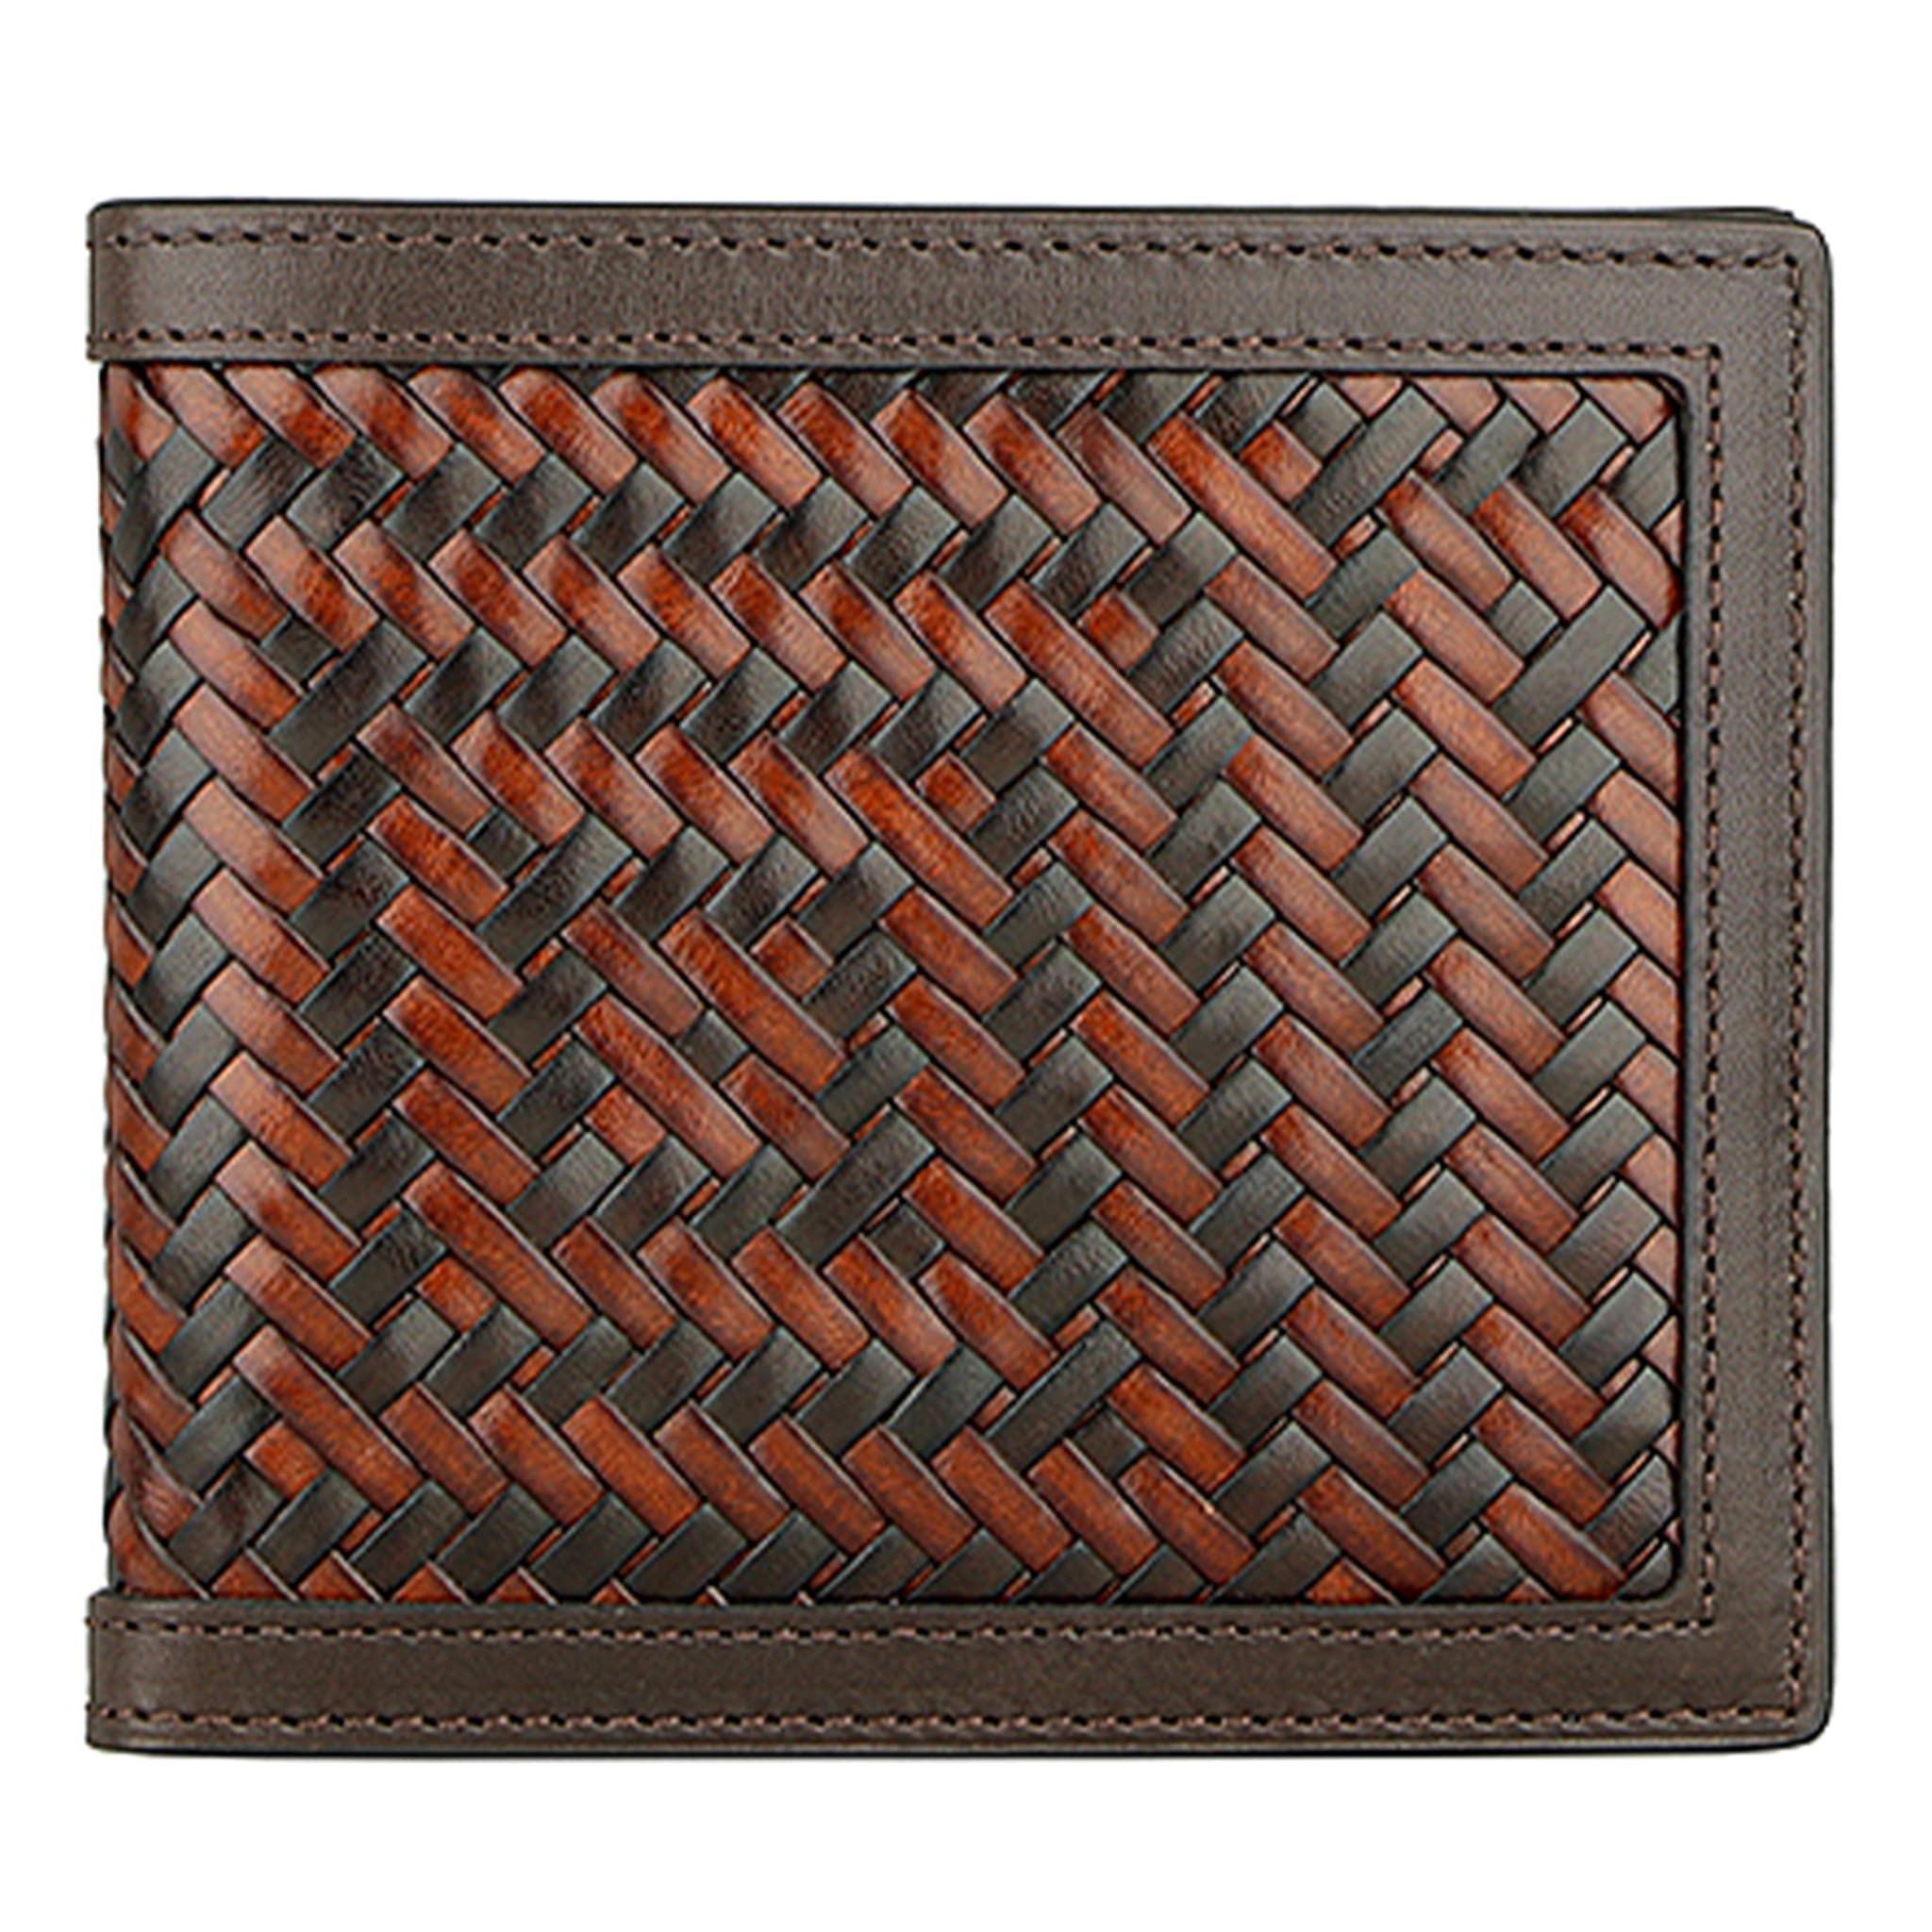 Braided Leather Light Brown Wallet - Main view